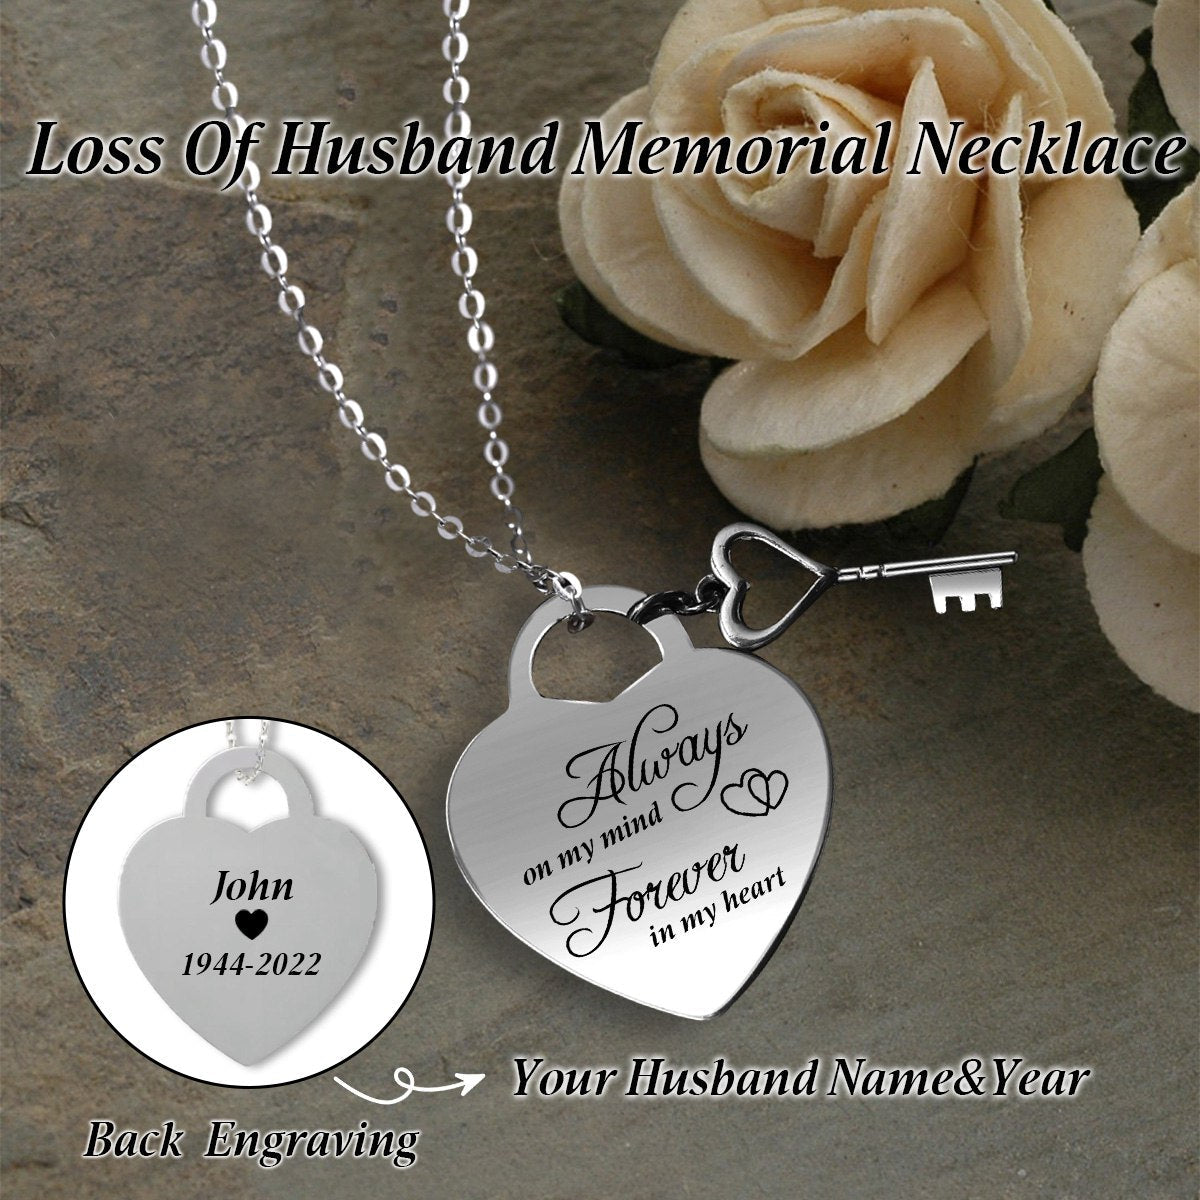 Personalized Memorial Heart Necklace With Heart Key